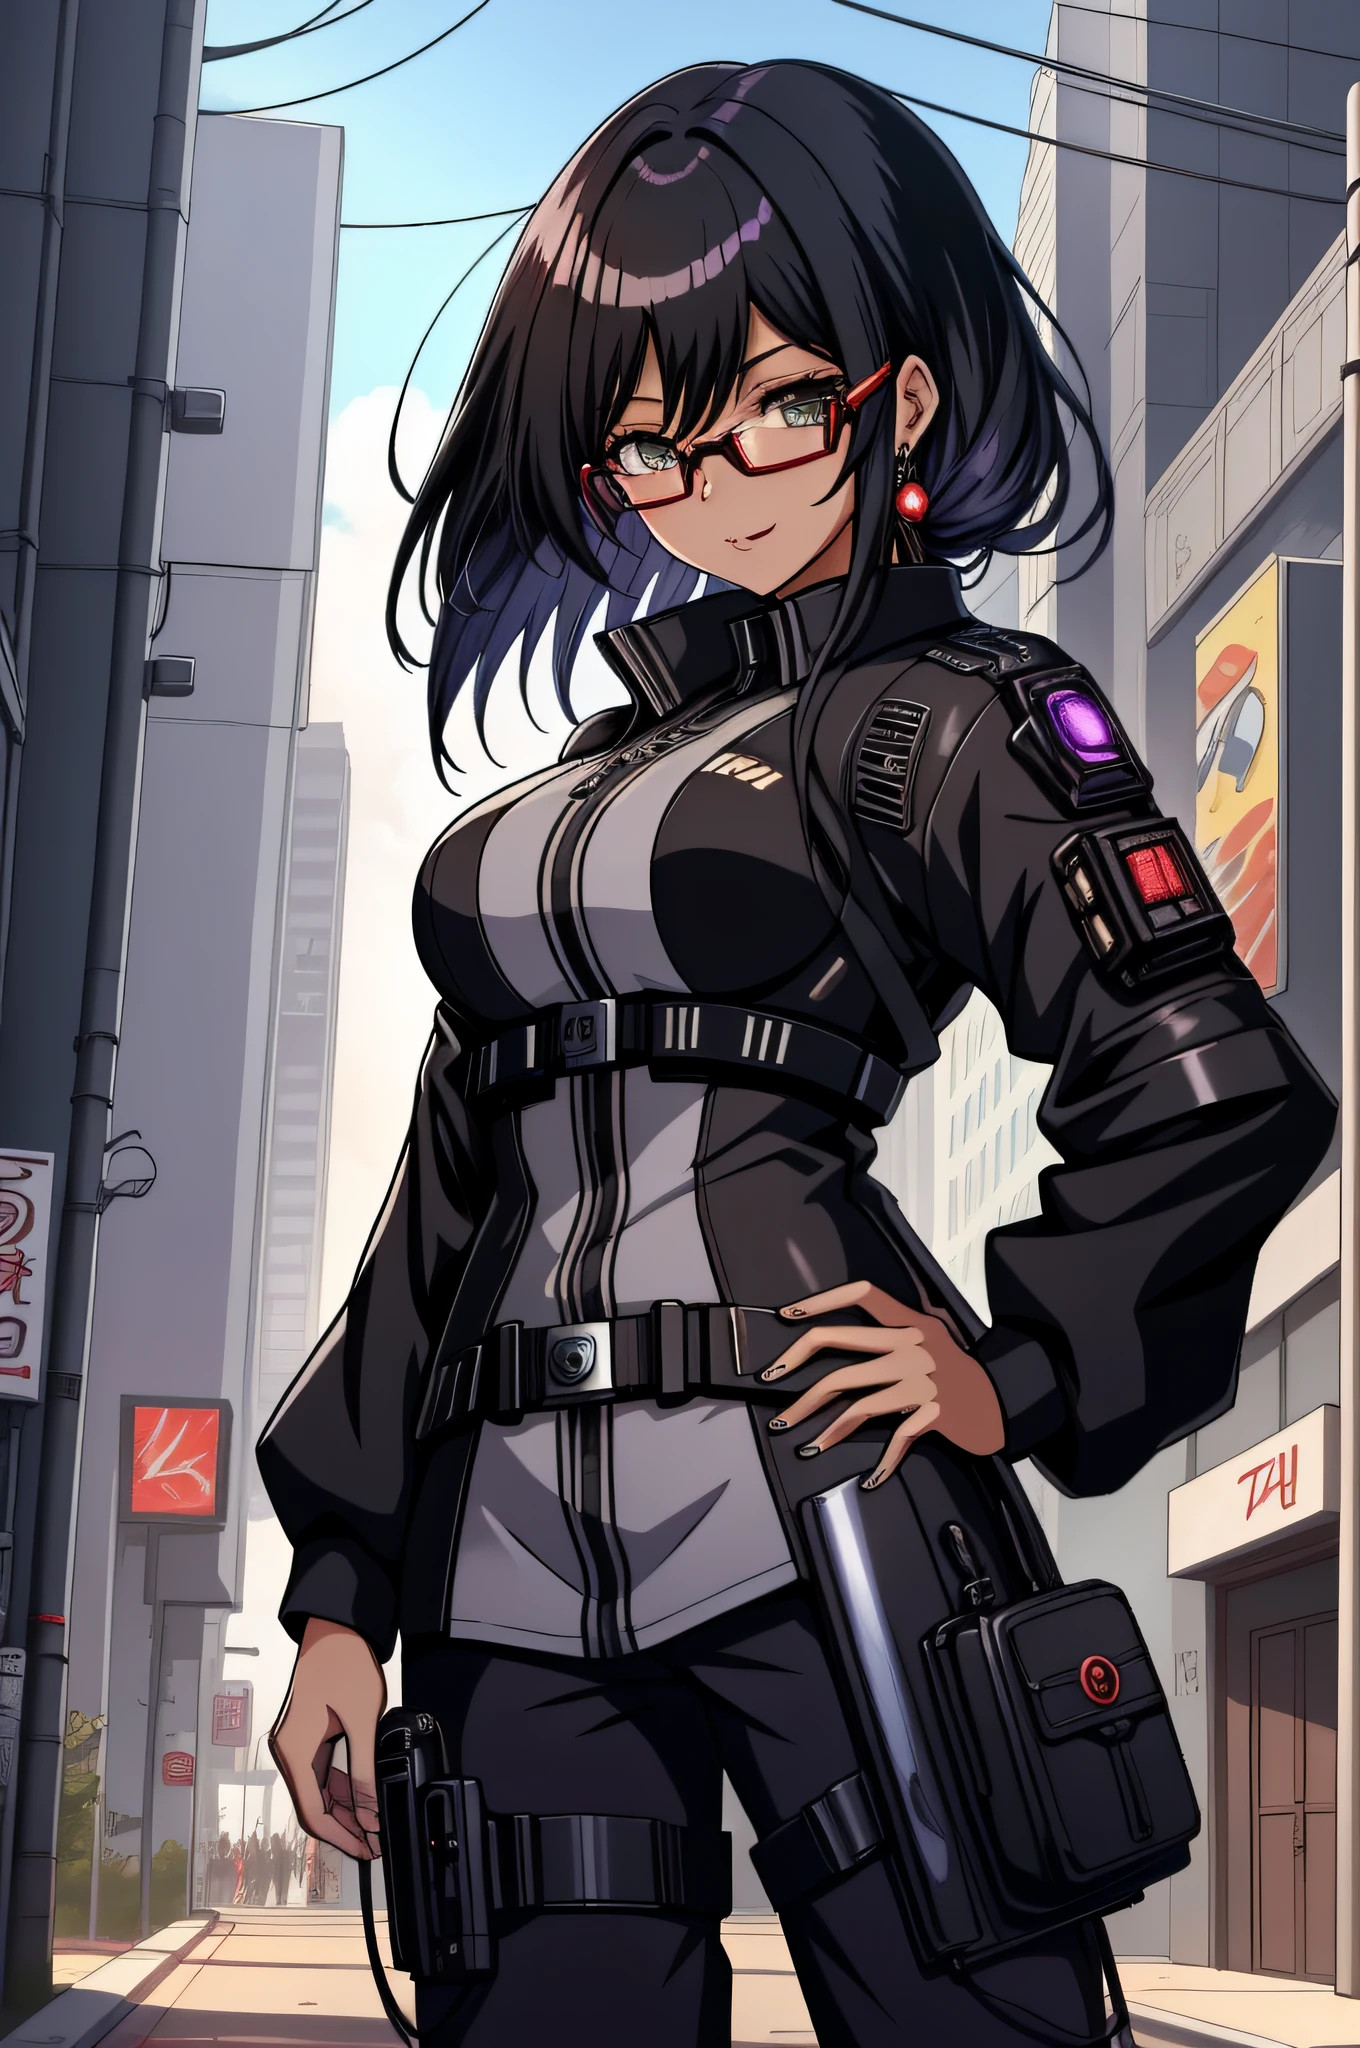 Anime - imagem de estilo 1mulher com olhos azuis e Bblack hair, Bblack hair, thick eyebrow, face of a 27 year old woman, 27 year old young man, cloused mouth, fully body, cyberpunk anime art,  tom de pele branca, (cloused mouth: 1.5), hand on hip, (double eyelid), (Bblack hair: 1.3), (shorth hair: 1.3), wearing dress, digital cyberpunk anime art, cyberpunk anime art, range murata and artgerm, eyeglass, futuristic clothing, hand on hip, (whole body: 1.7), wearing dress, stylish pants, Technological dress, transparent spectacle lenses, 极其详细的Artgerm, modern cyberpunk anime, artgerm and atey ghailan, artgerm and genzoman, cloused mouth